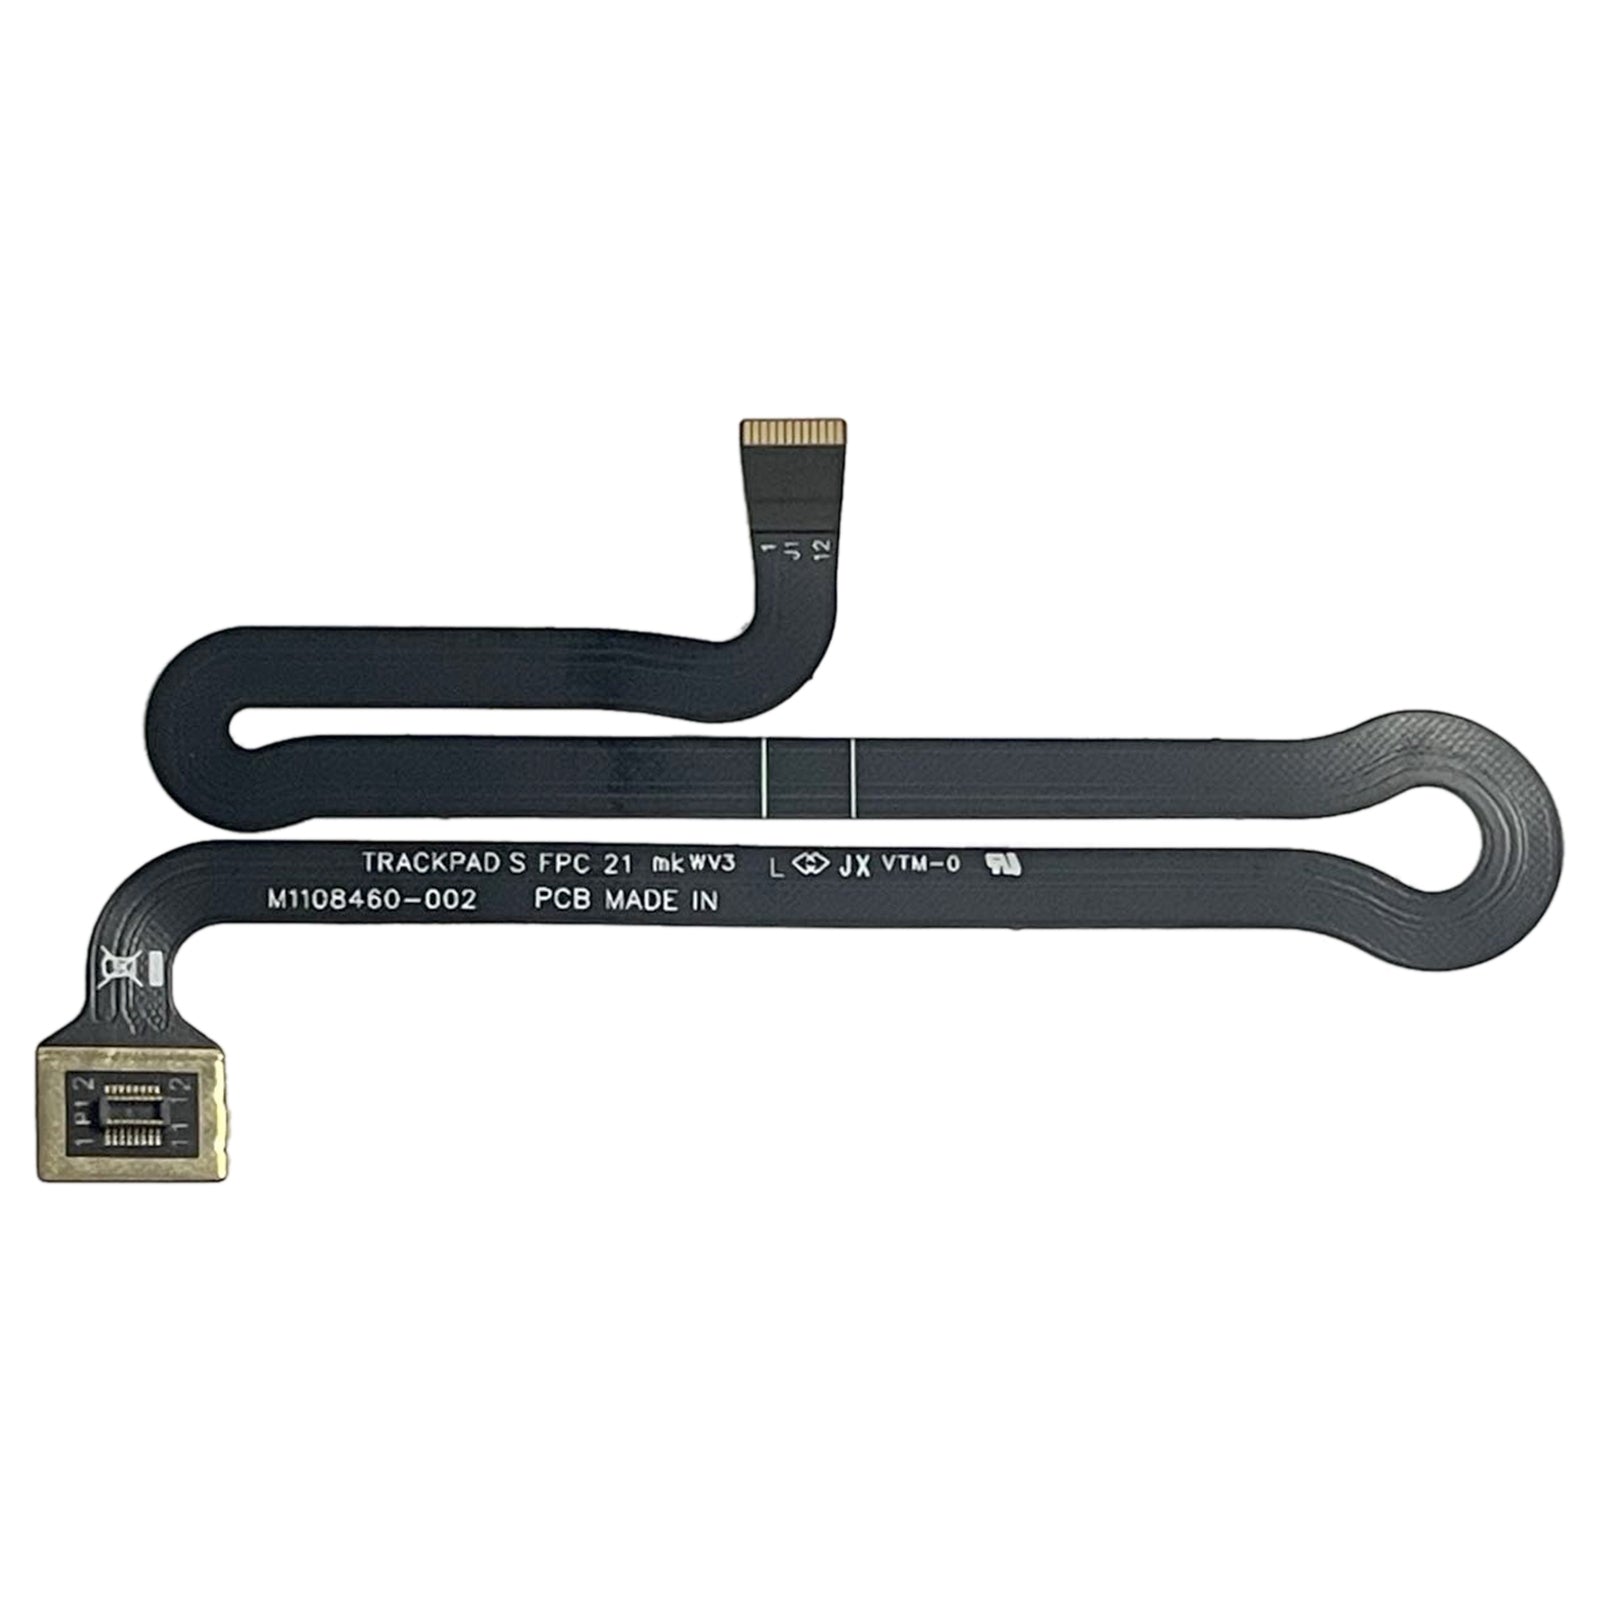 Flex Cable Connector Keyboard Microsoft Laptop 3 13.5 M108461-001 1867 1868